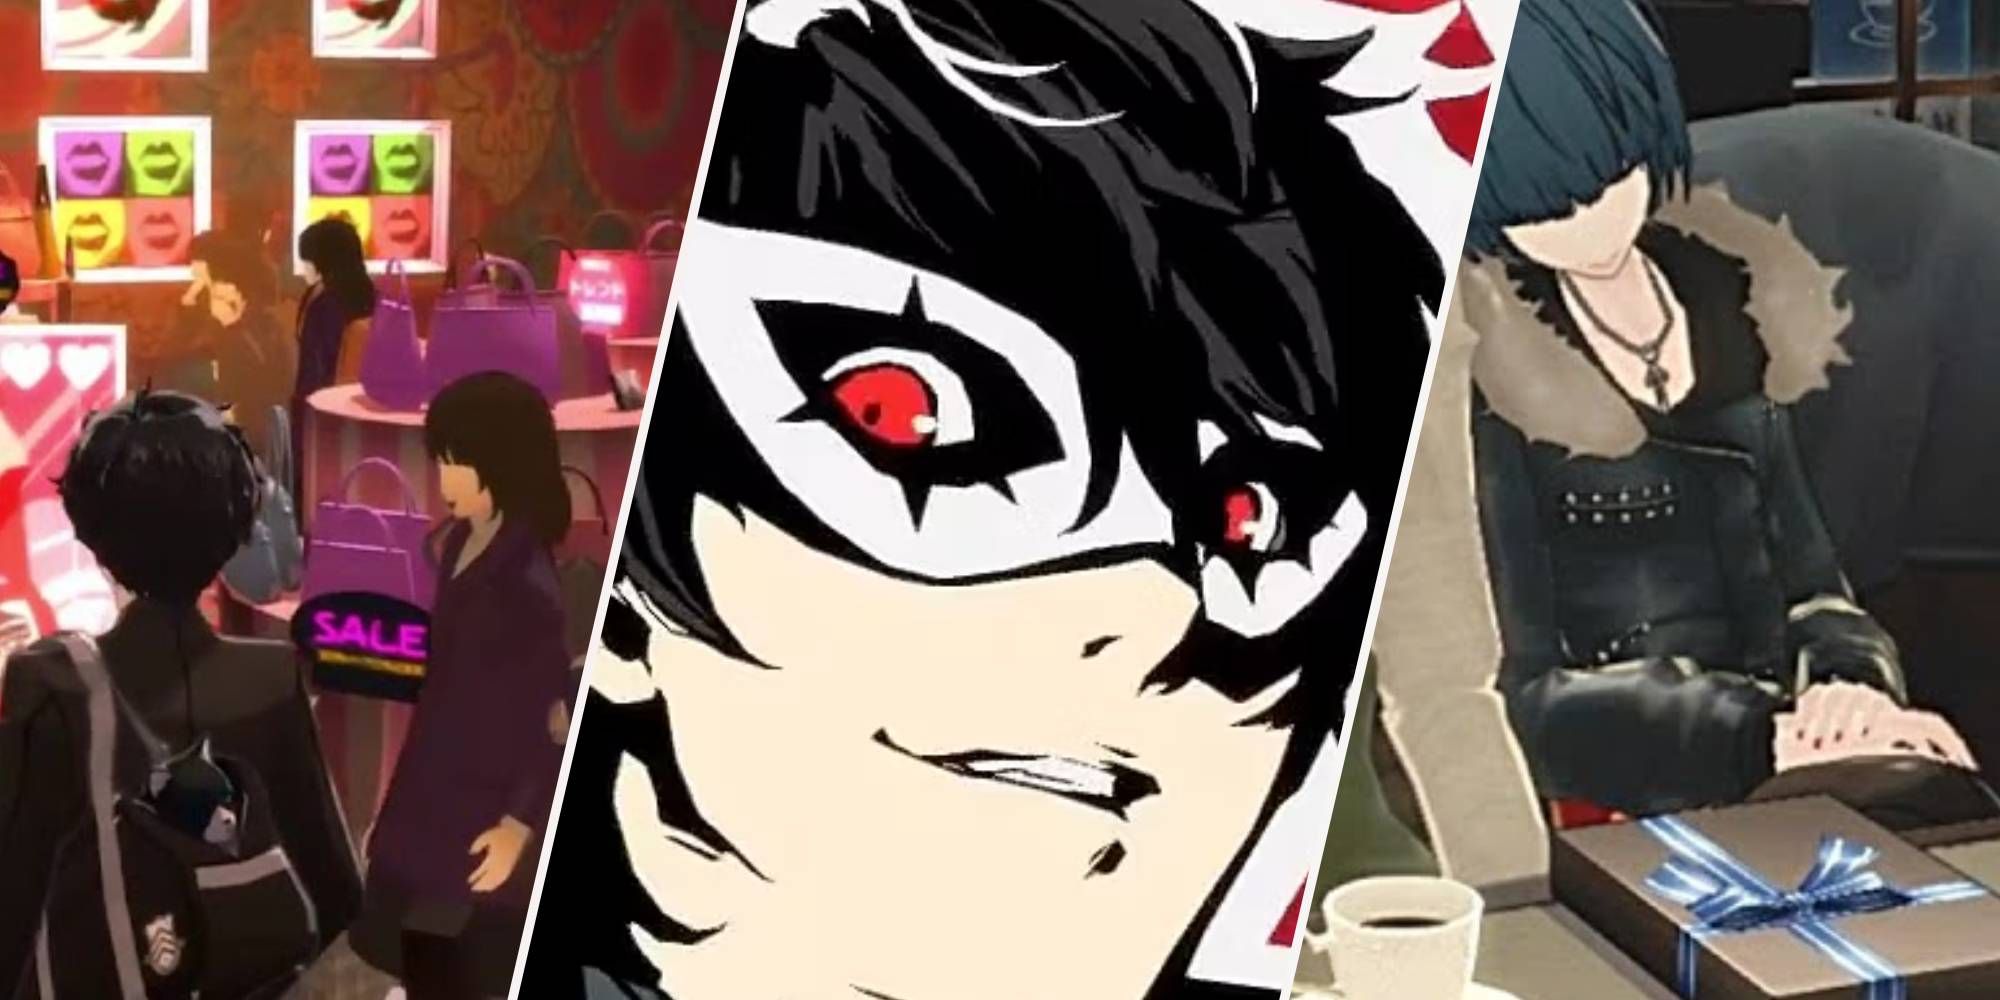 Persona 5 Royal confidant gift guide - which gifts to get to impress